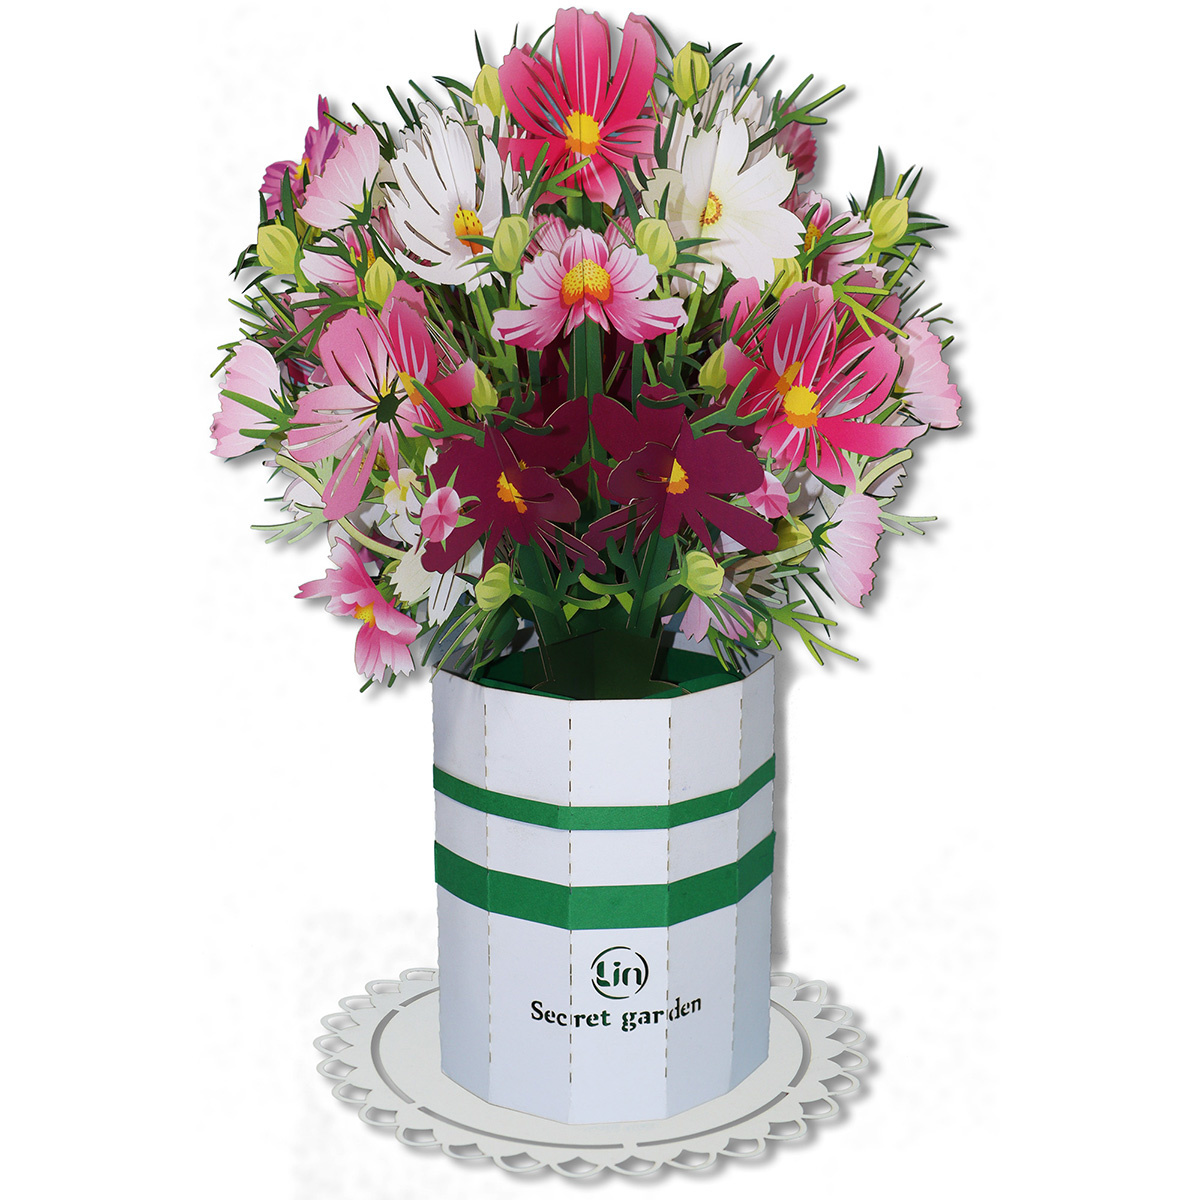 LINPOPUP LIN pop up bouquet, handmade flowers incl. vase & saucer, as a gift for birthday, mother's day, anniversary, get well soon, thank you, paper flower bouquet, flowers basket, LIN17905, LINPopUp®, N803